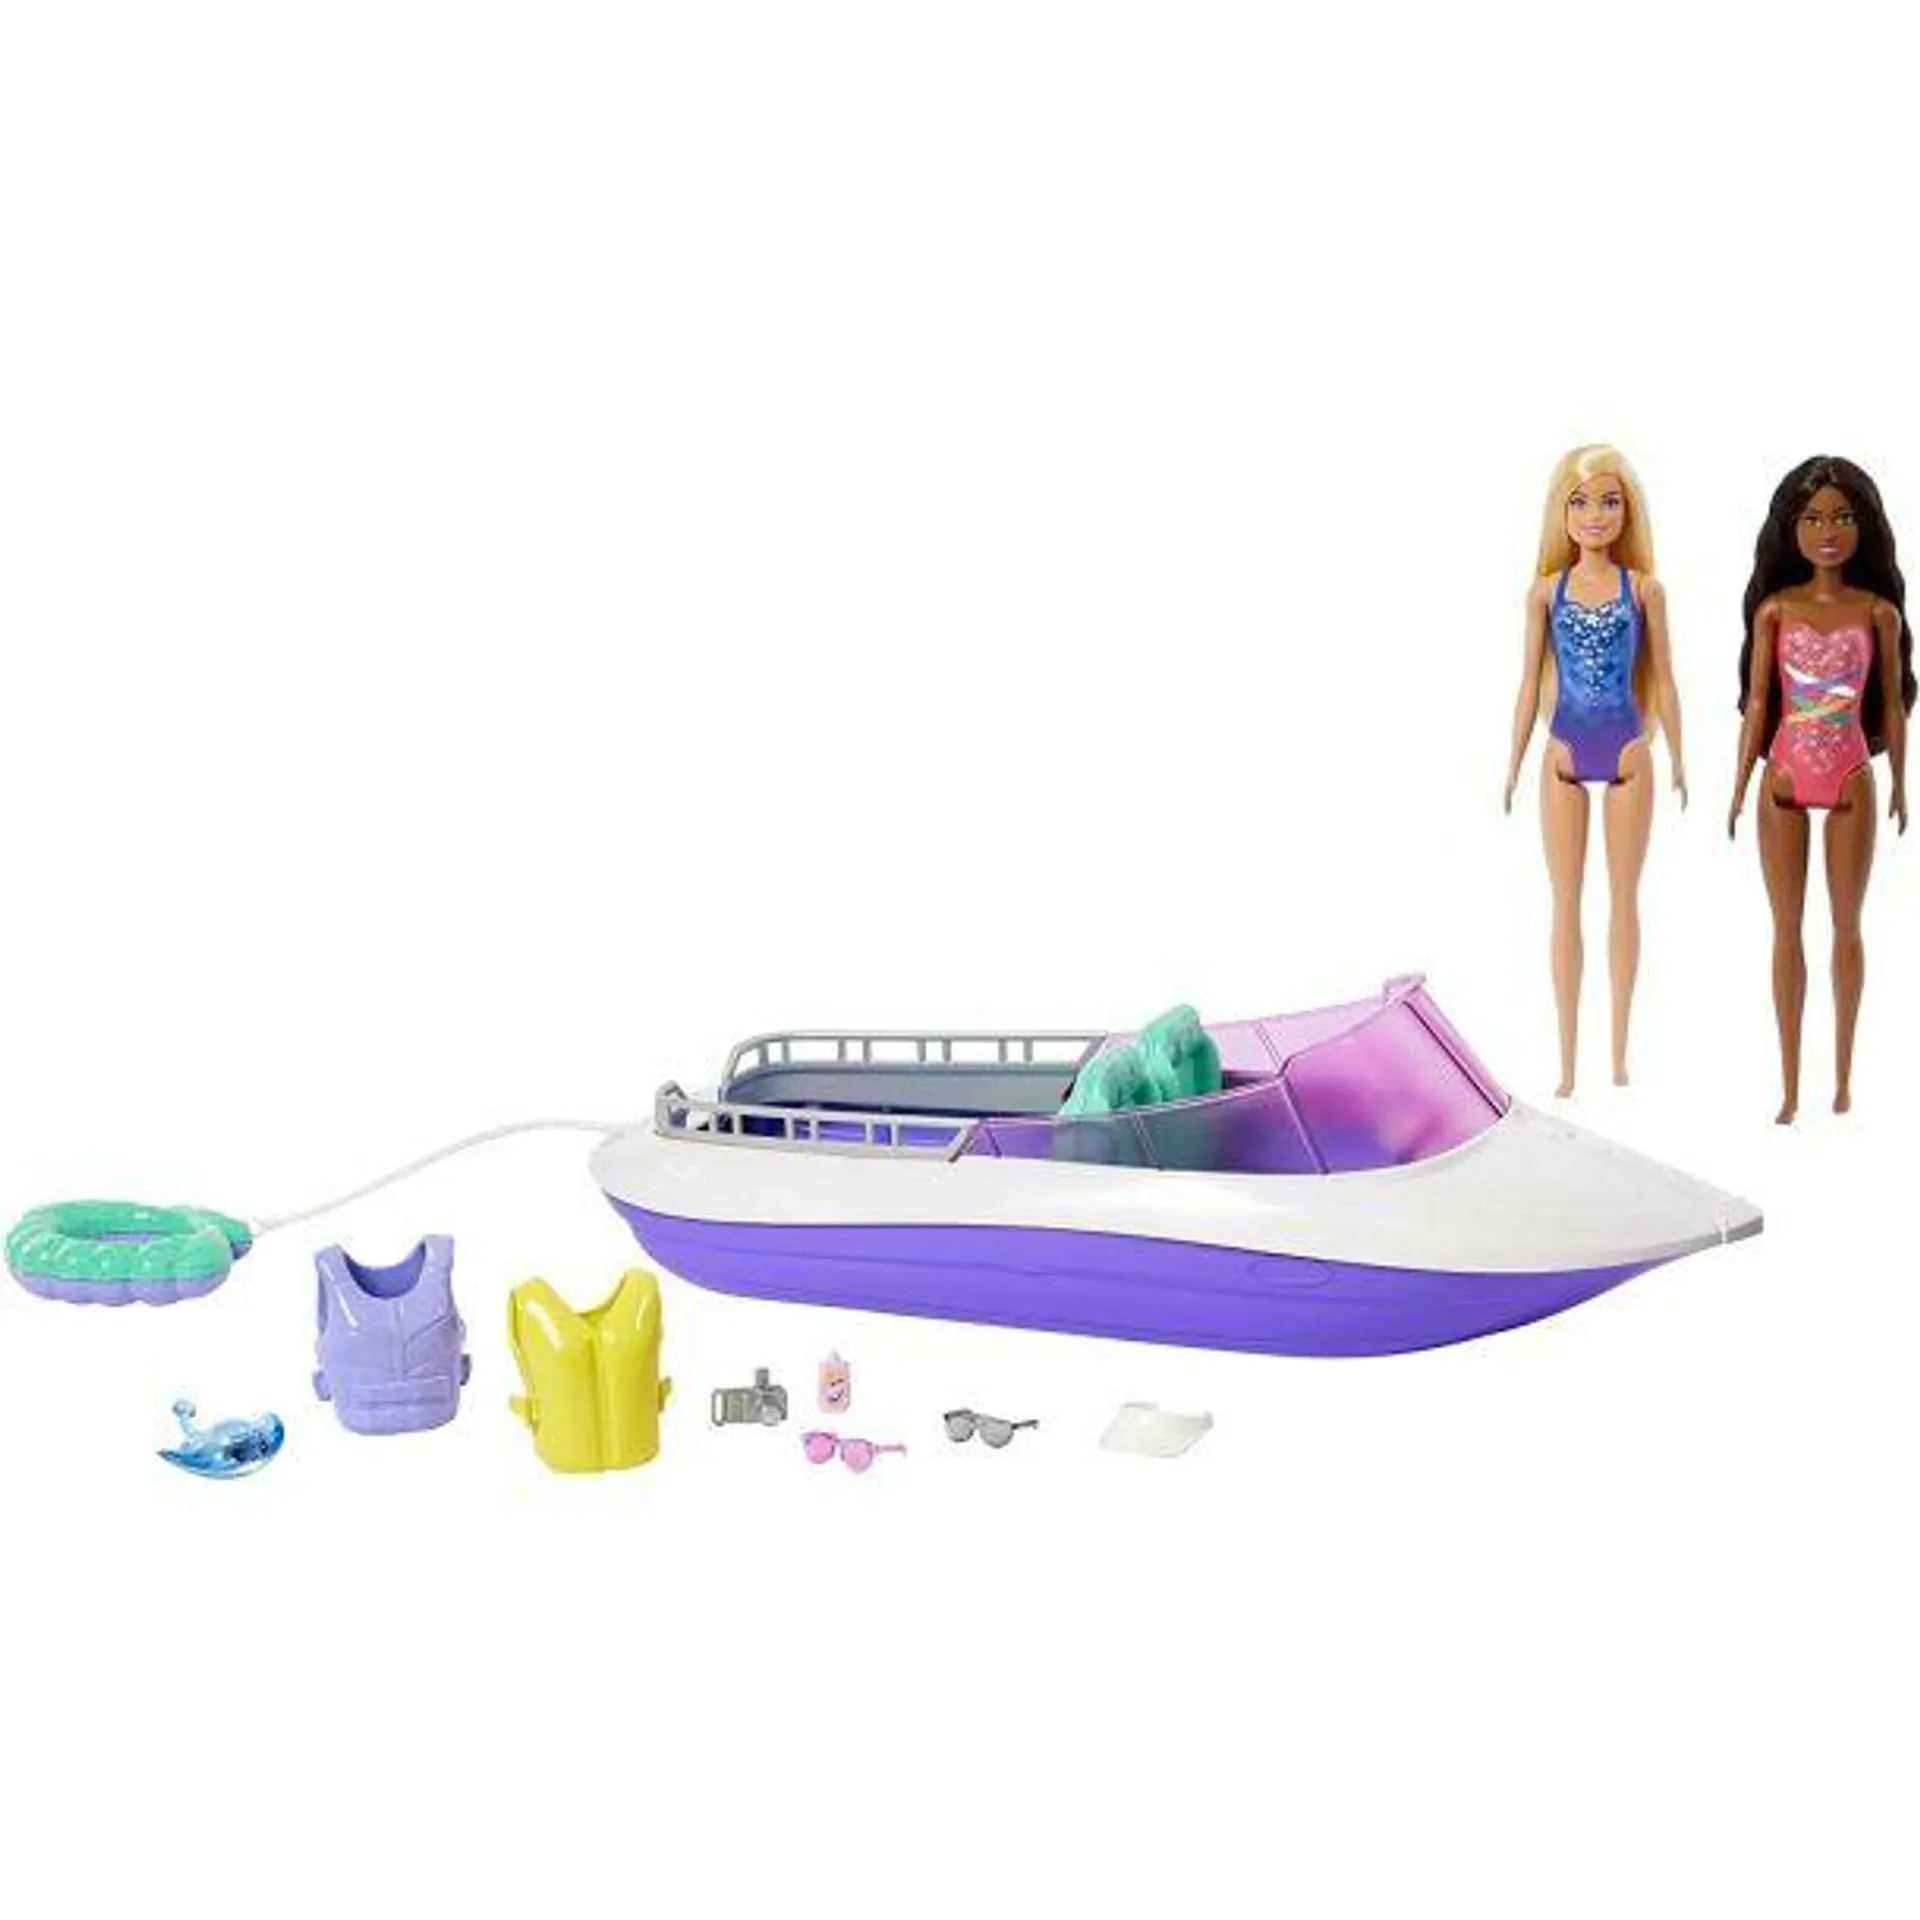 Barbie Mermaid Power Playset with 2 Dolls and 18-inch Floating Boat